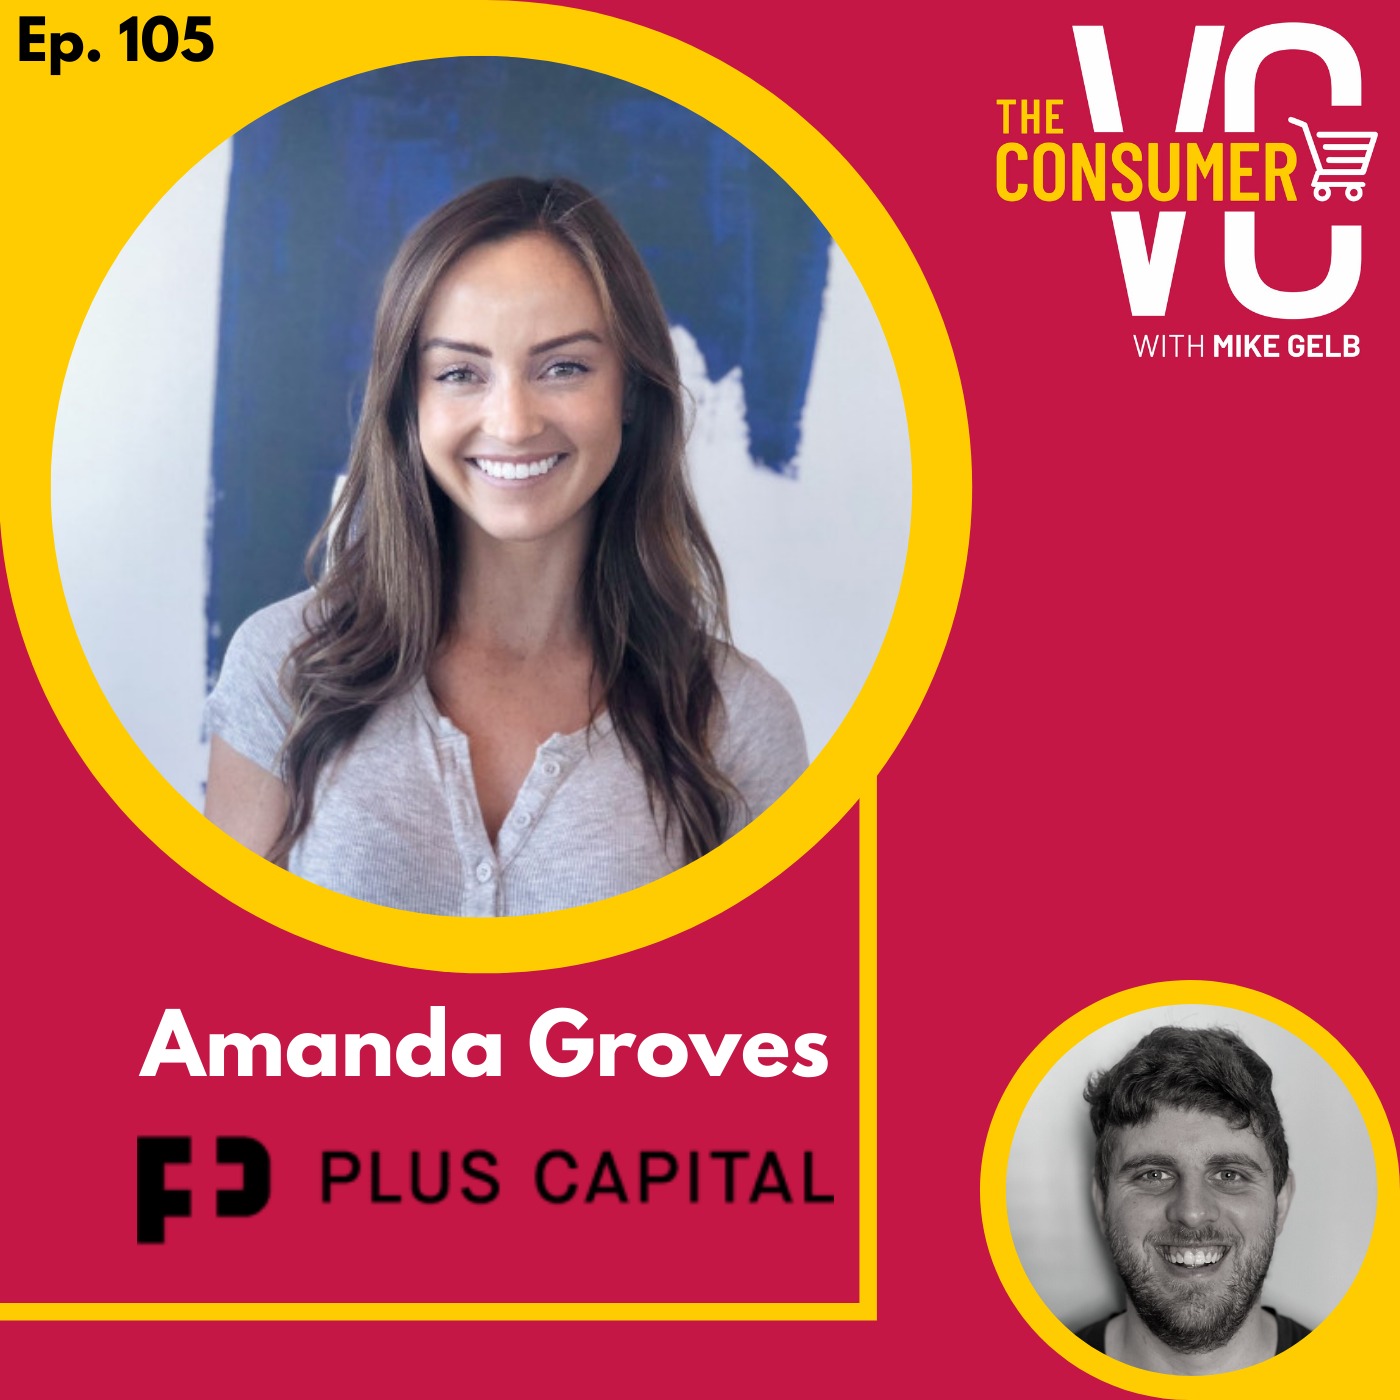 Amanda Groves (PLUS Capital) - The Power of Celebrity, The Most Unlikely Partnership, and Managing an Advisory Practice with a VC Fund